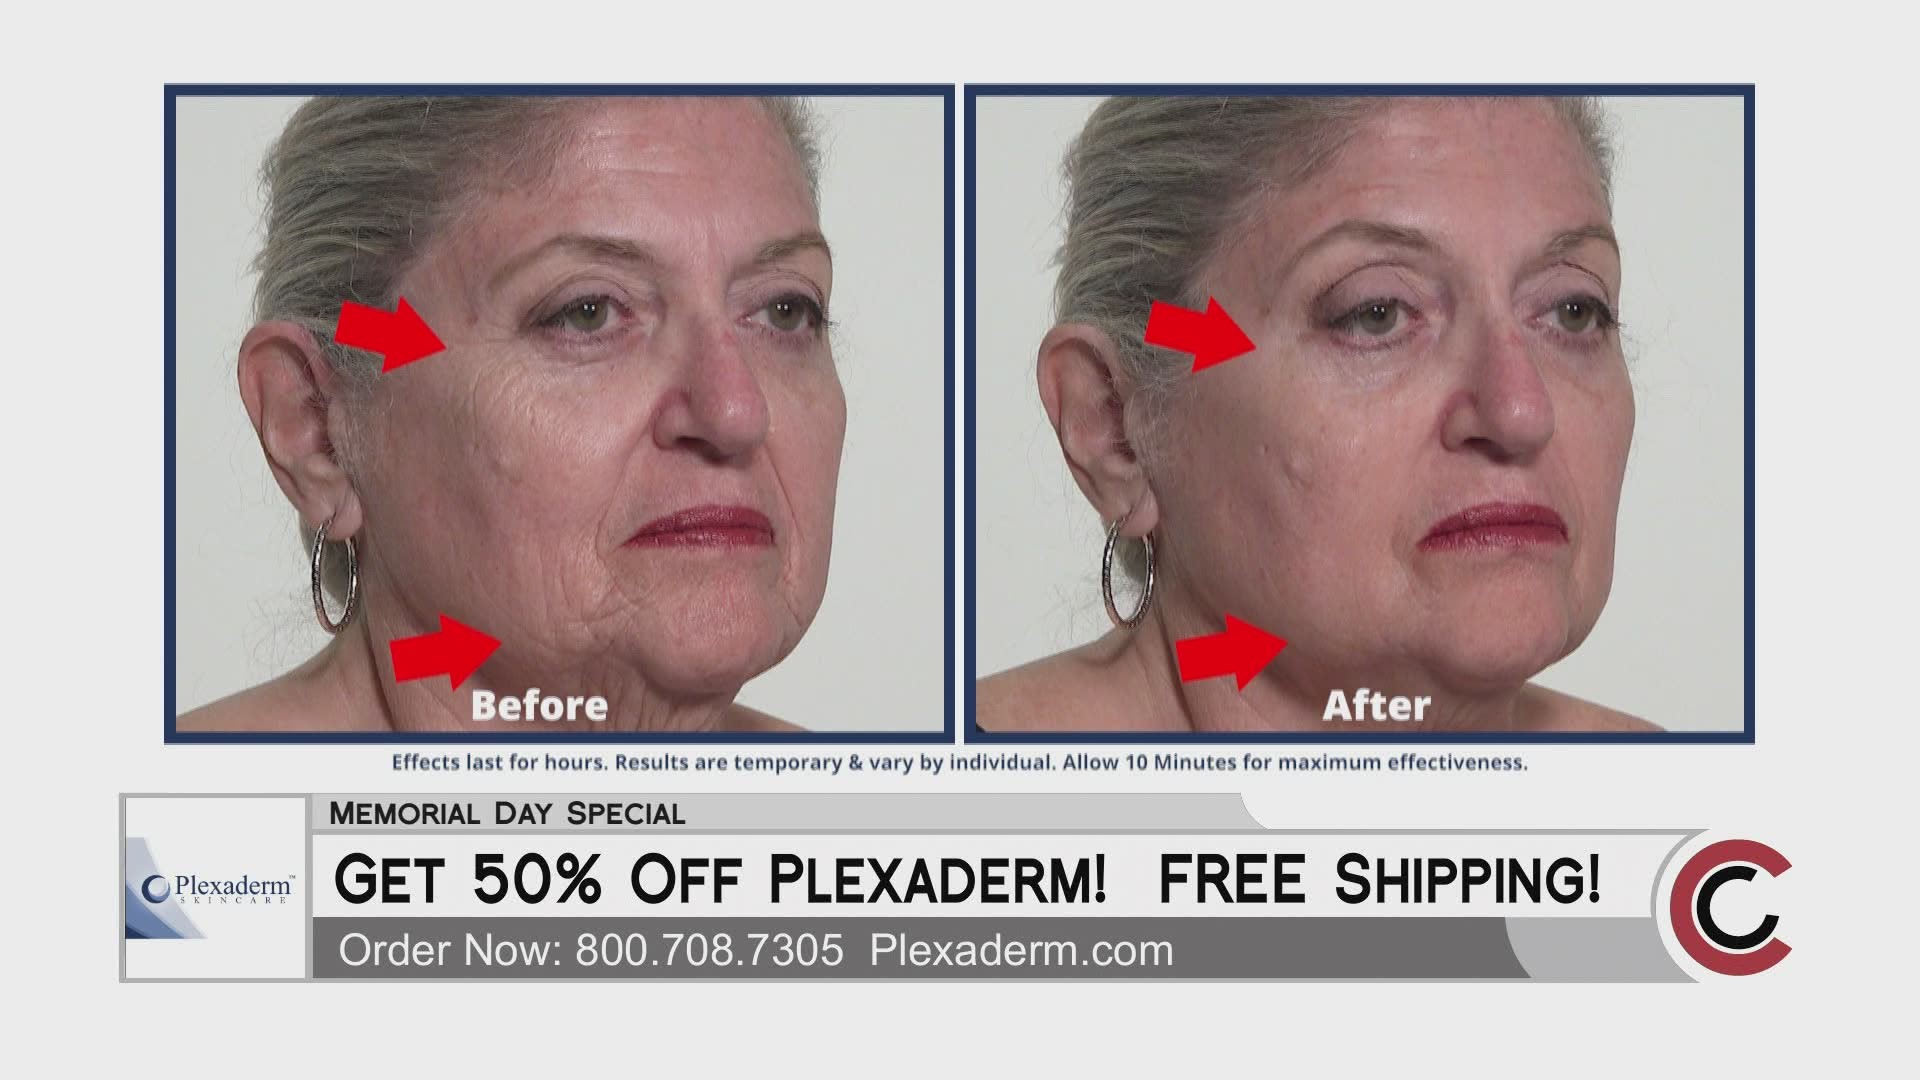 Get results in just minutes with Plexaderm. Call 800.708.7305 or visit Plexaderm.com to get 50% off with free shipping!